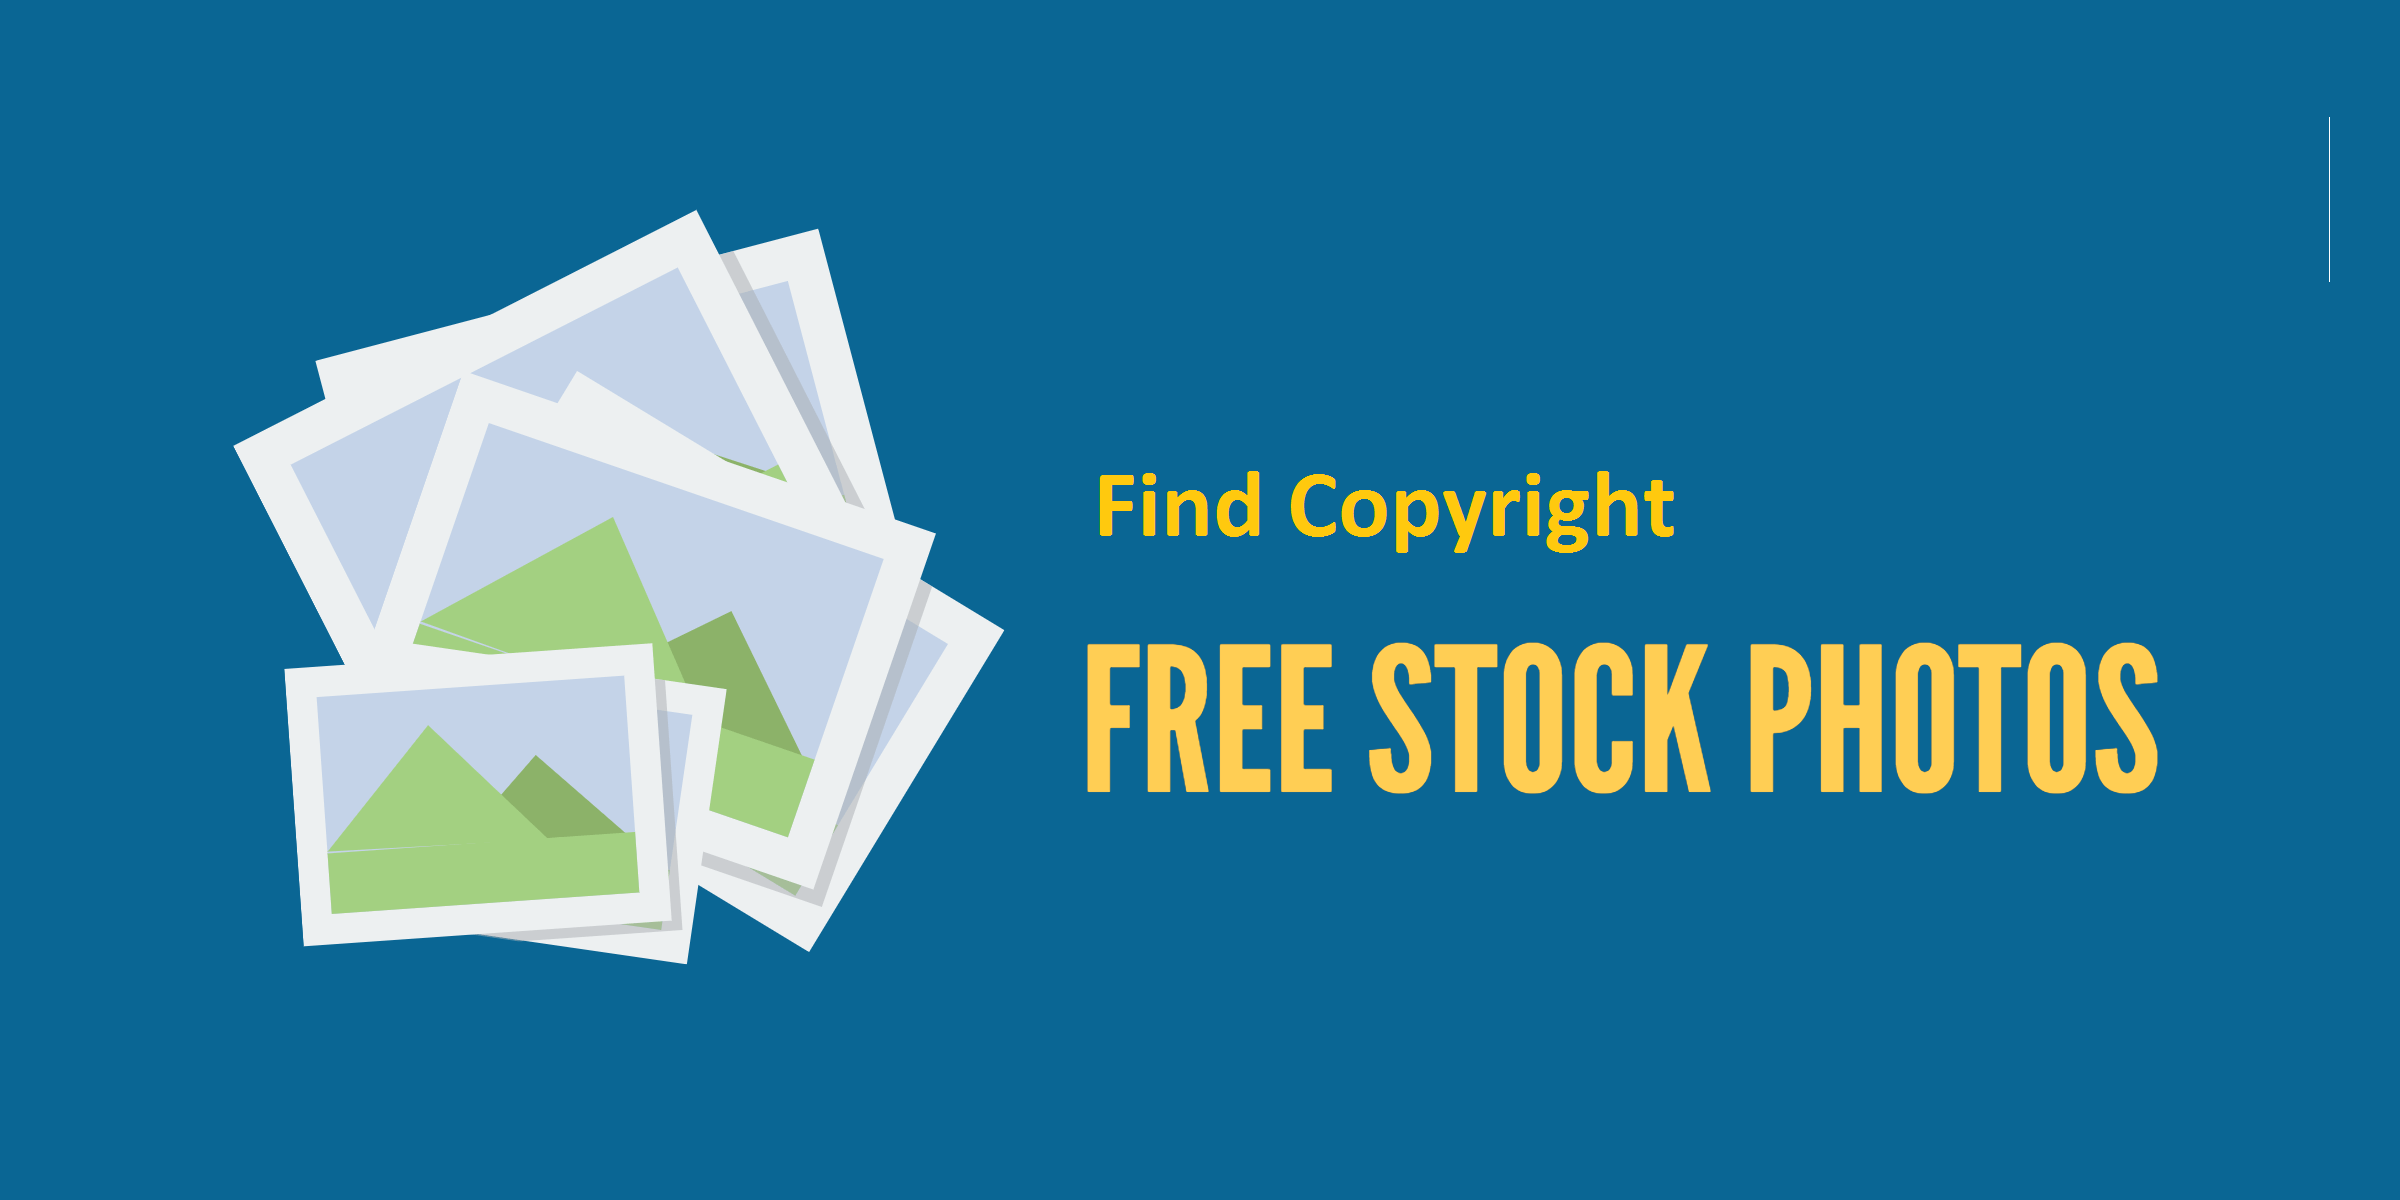 Finding Copyright Free Stocks Images